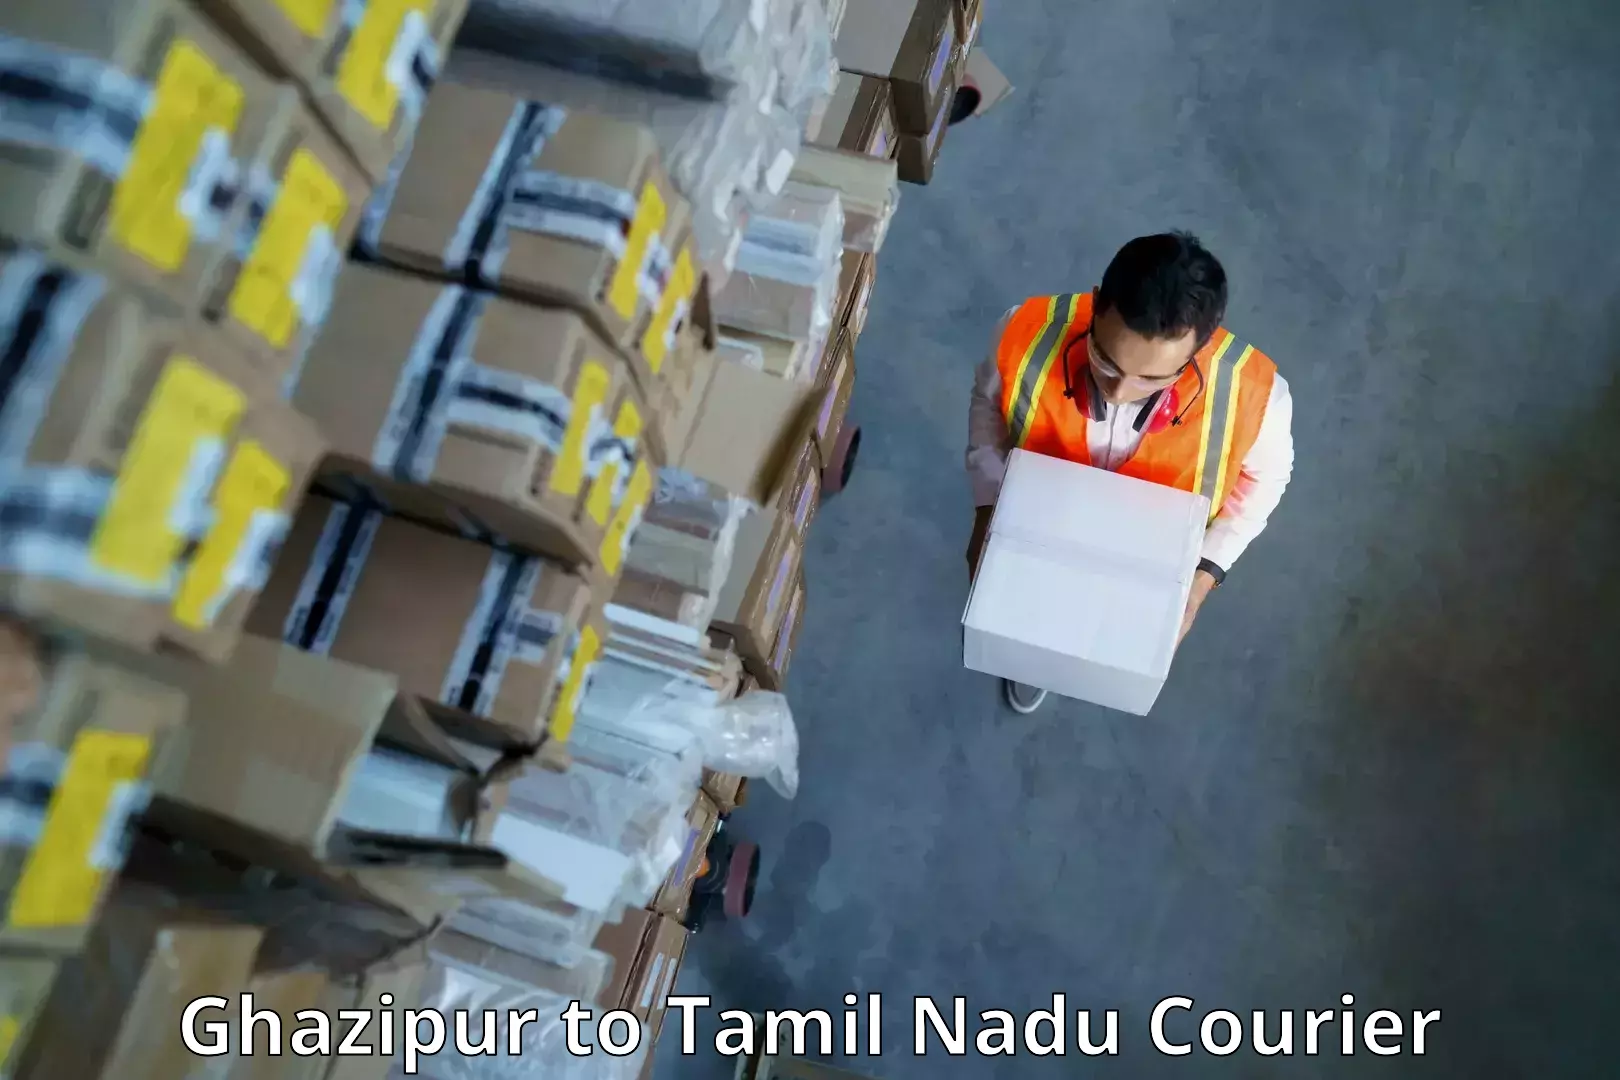 On-call courier service Ghazipur to Theni